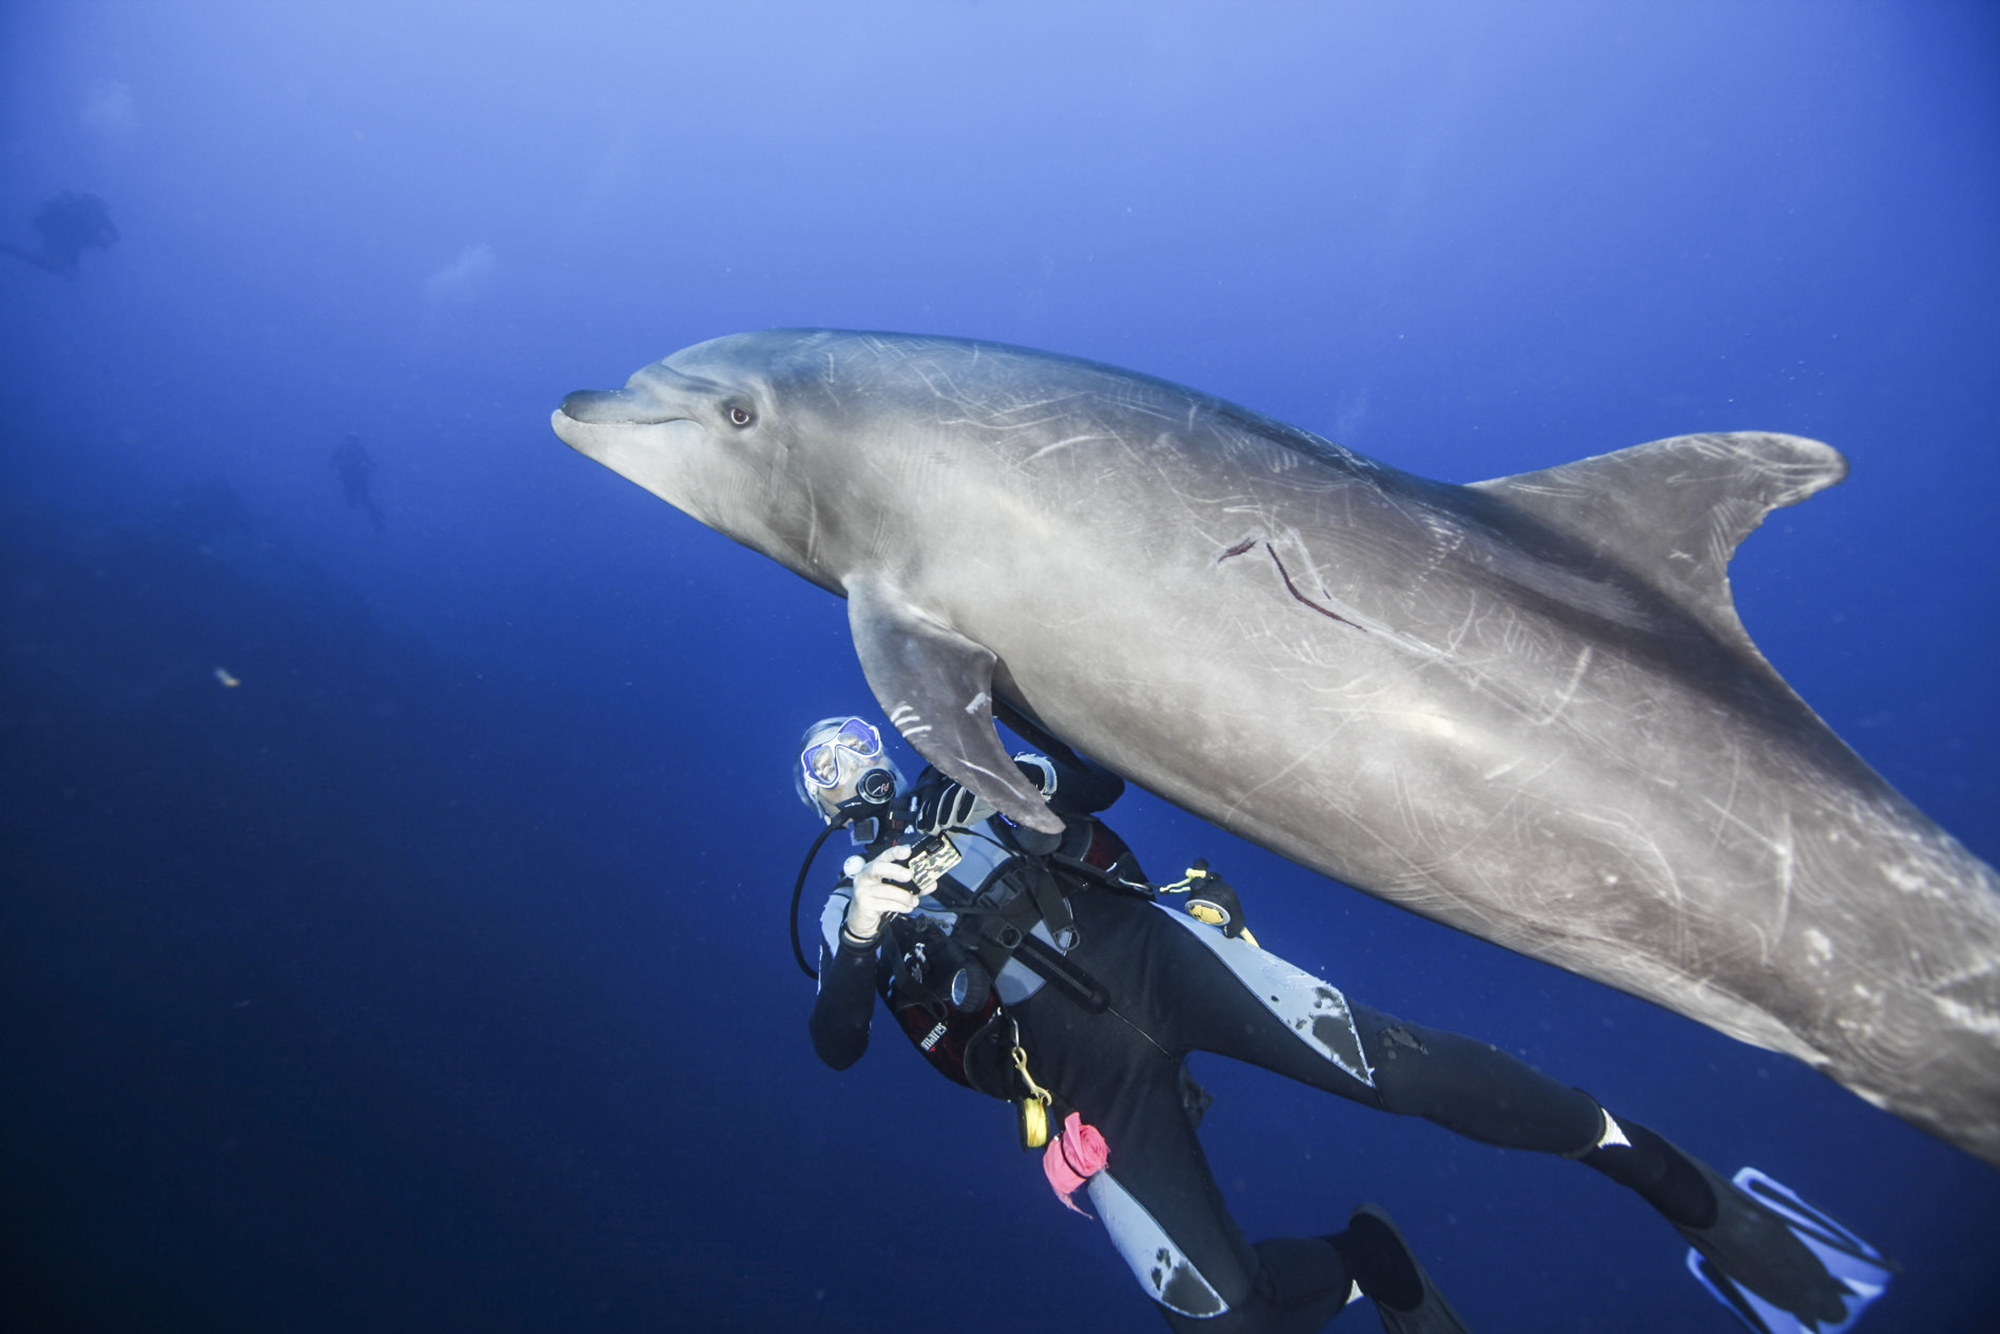 A diver swims under a dolphin at Cabo Pearce